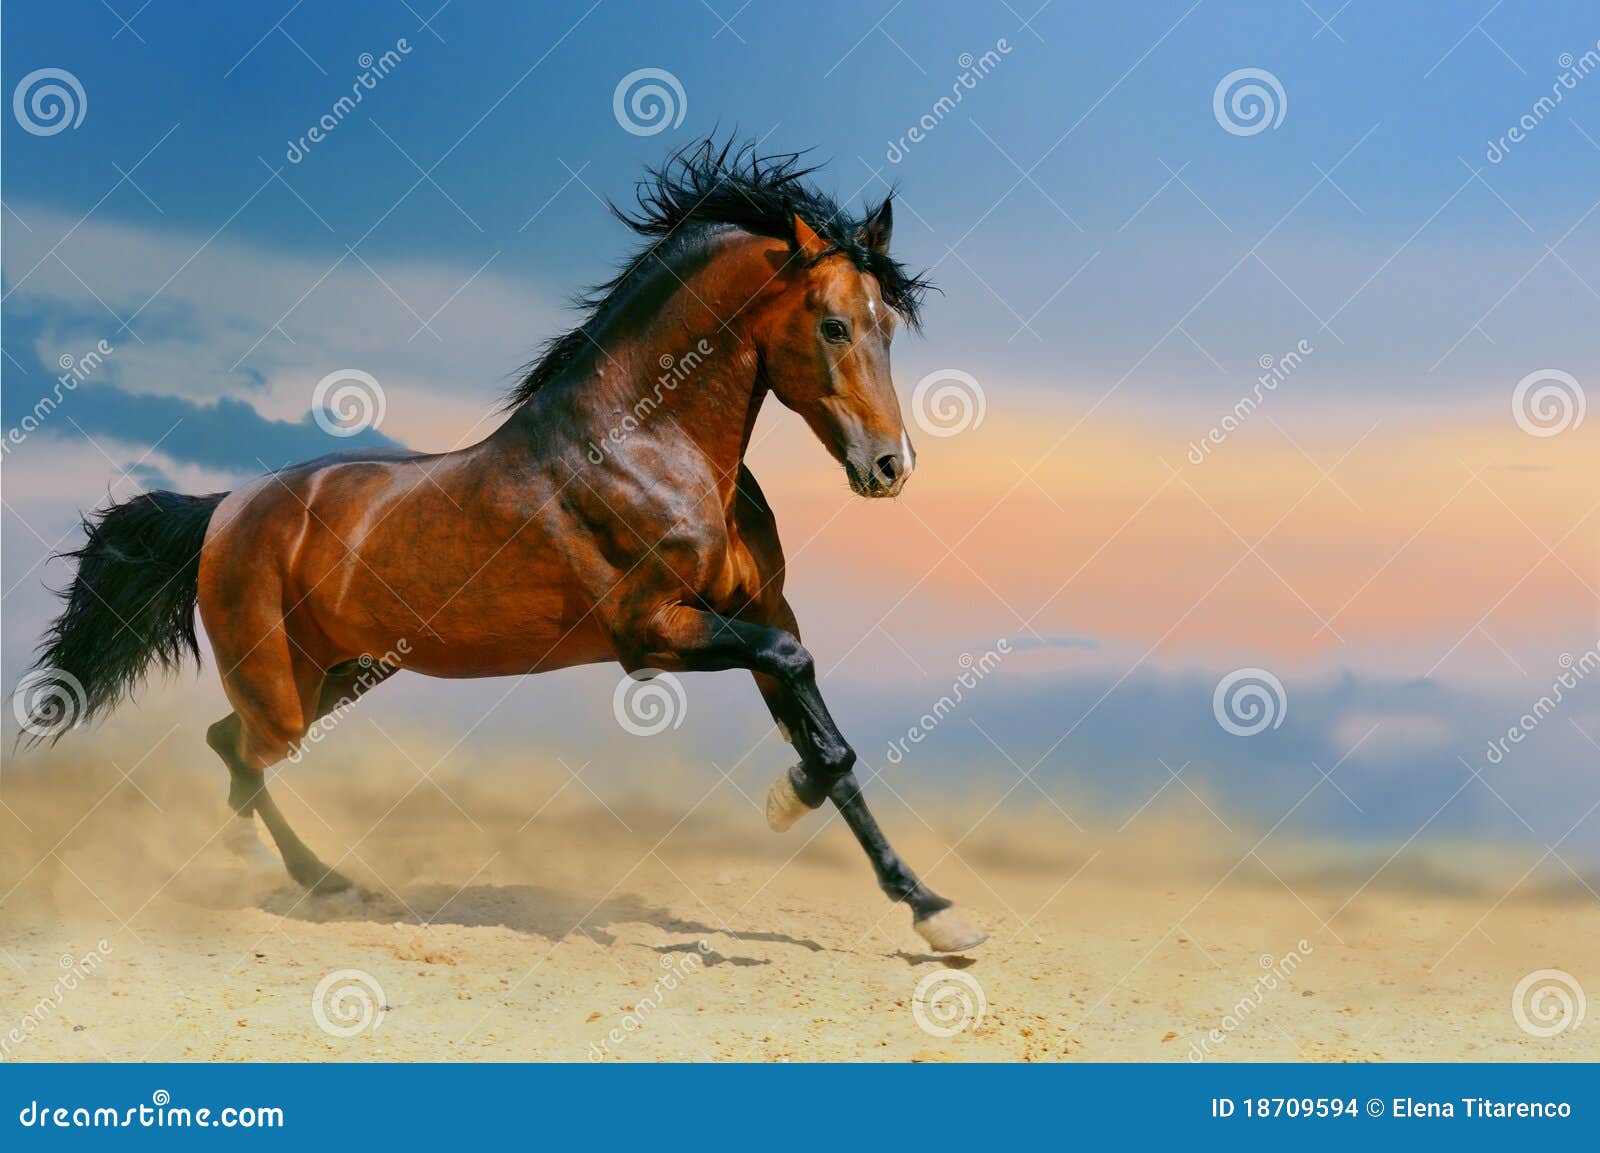 35 454 Running Horse Photos Free Royalty Free Stock Photos From Dreamstime